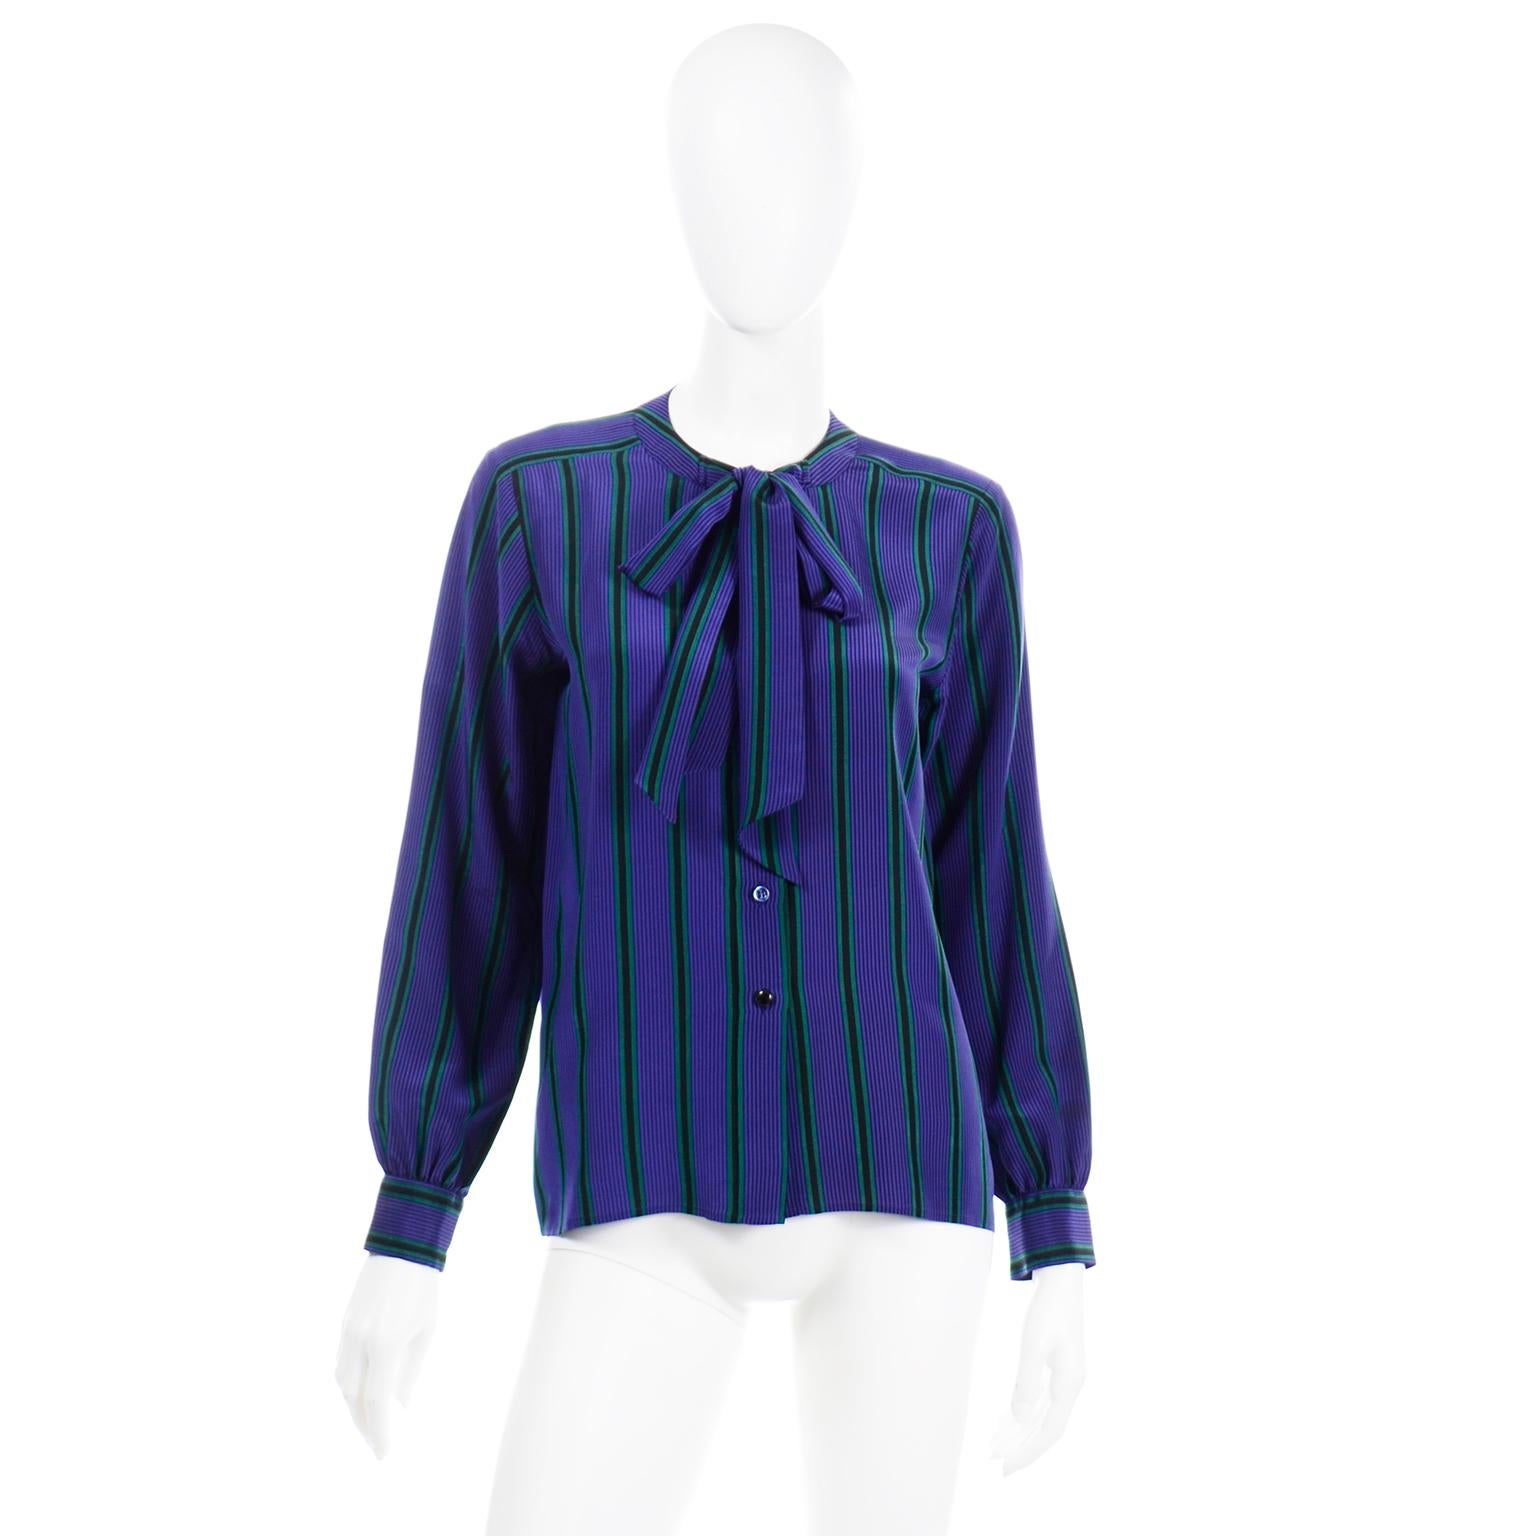 This beautiful Yves Saint Laurent Rive Gauche vintage blouse is in a luxe purple, black and green striped silk. We love the sash attached to the rounded collar that can be tied in a simple knot or a bow. This blouse is a timeless piece that is from